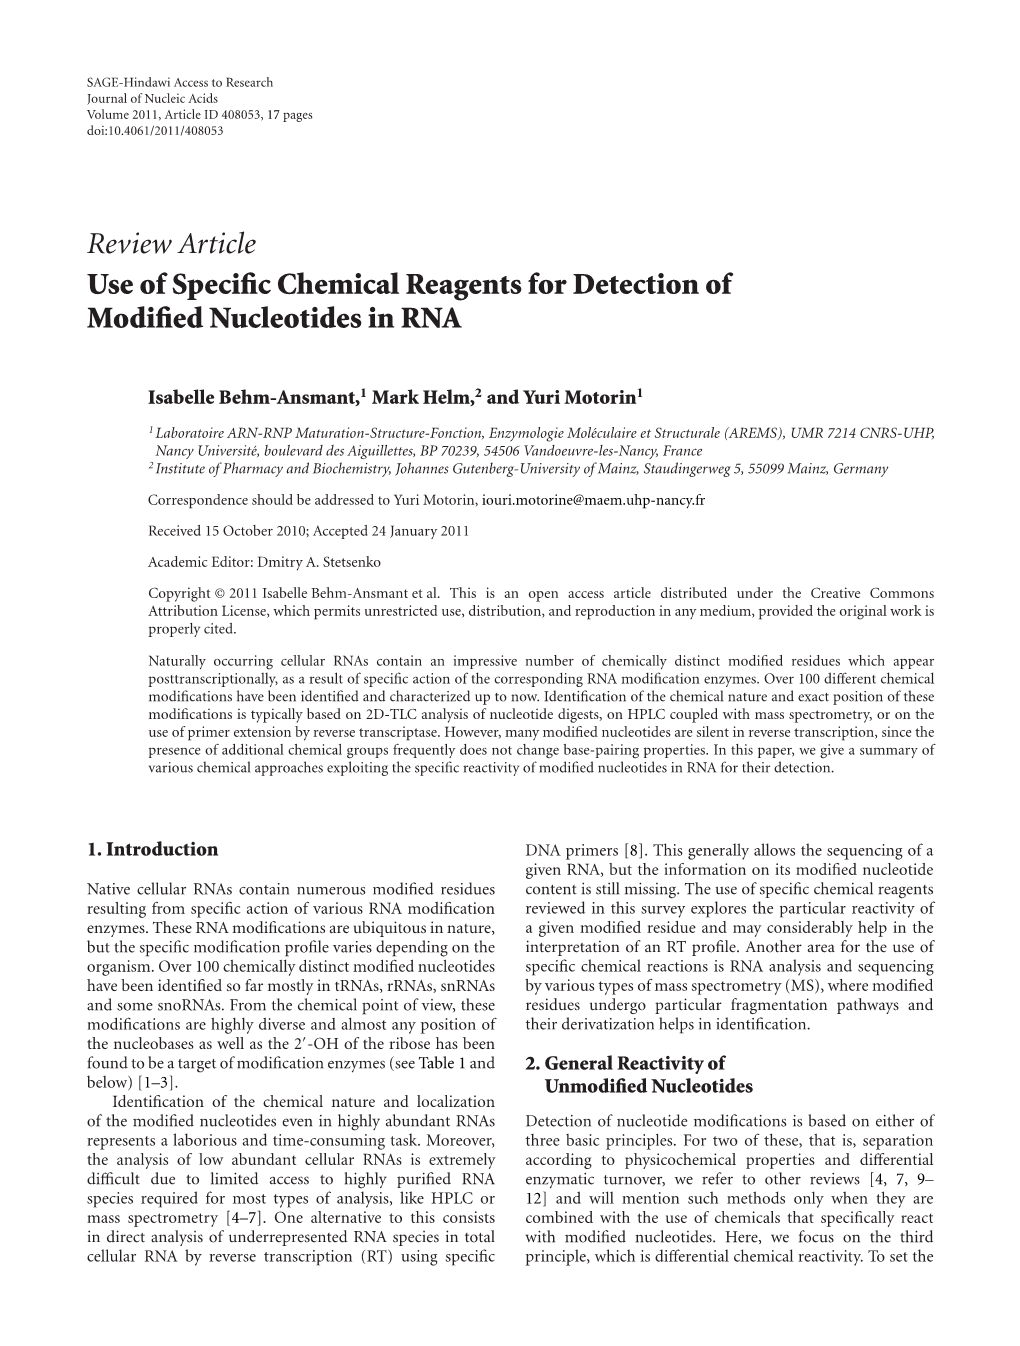 Use of Specific Chemical Reagents for Detection of Modified Nucleotides